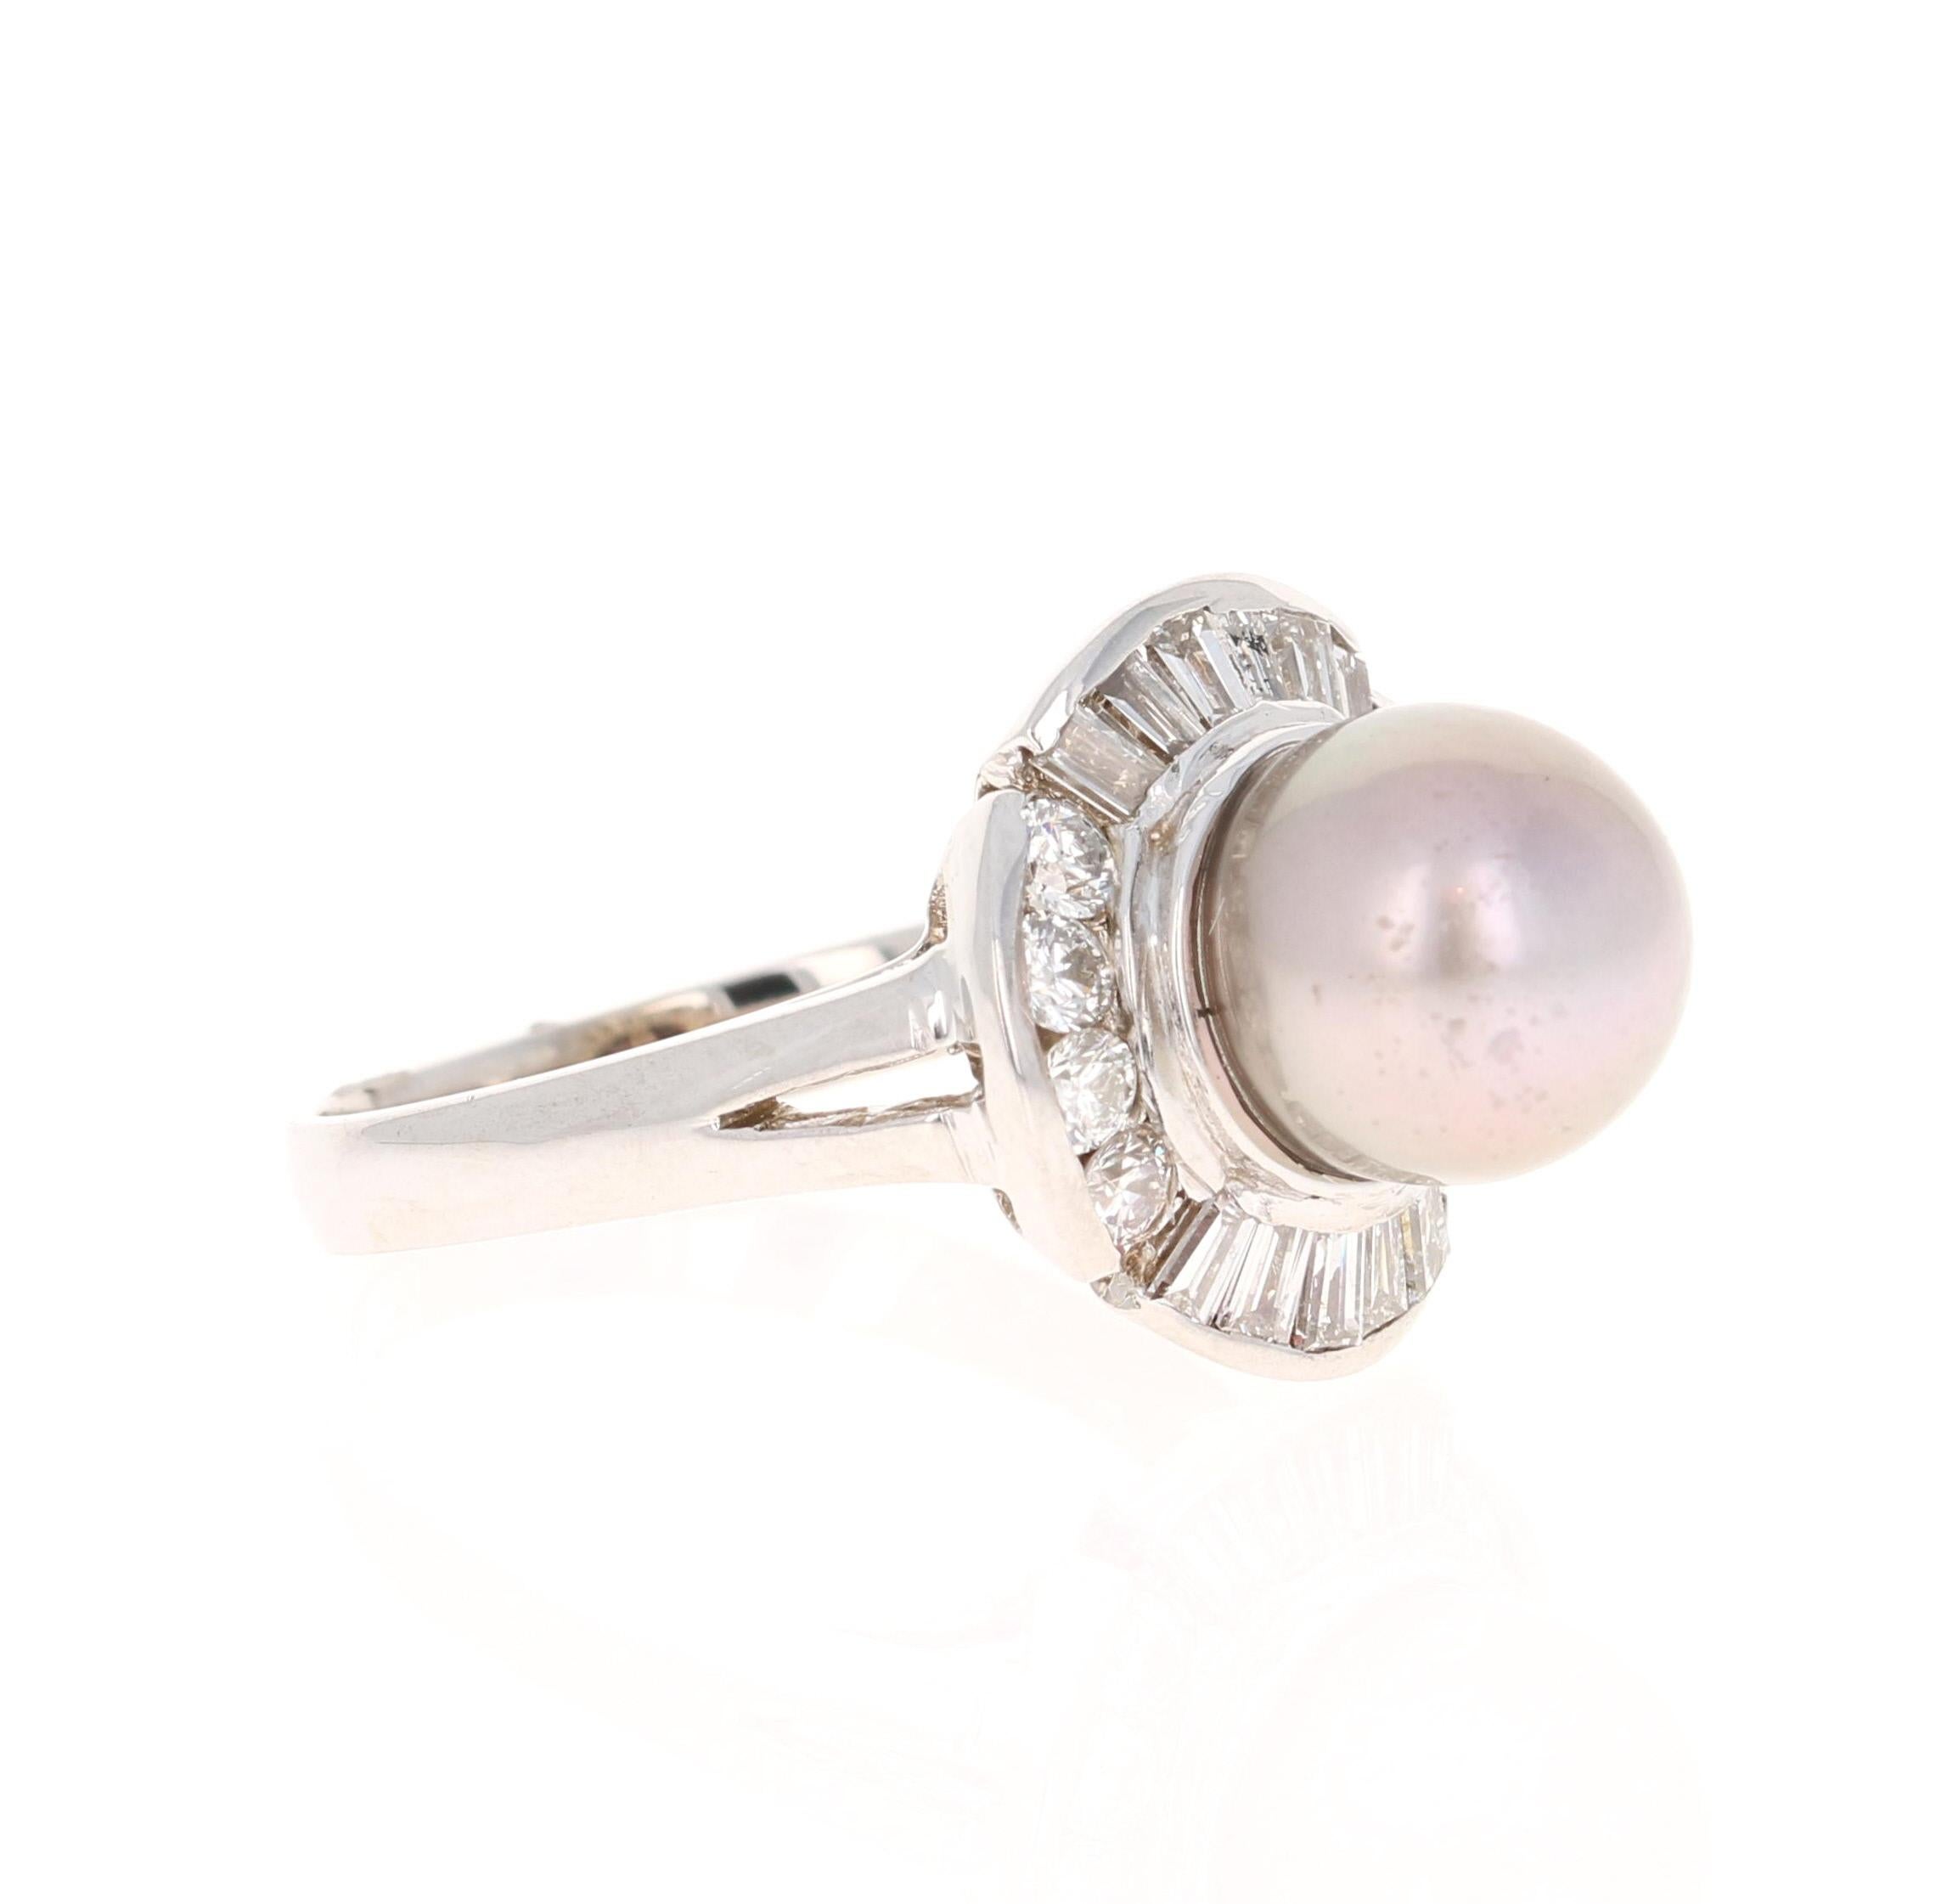 Tahitian Pearl Ring that has a 8mm Pearl and is surrounded by 12 Baguette Cut Diamonds that weigh 0.45 carats. (Clarity: VS2, Color: F)
The ring is made in 14K White Gold and weigh approximately 4.7 grams.   
The ring is a size 7 and can be resized